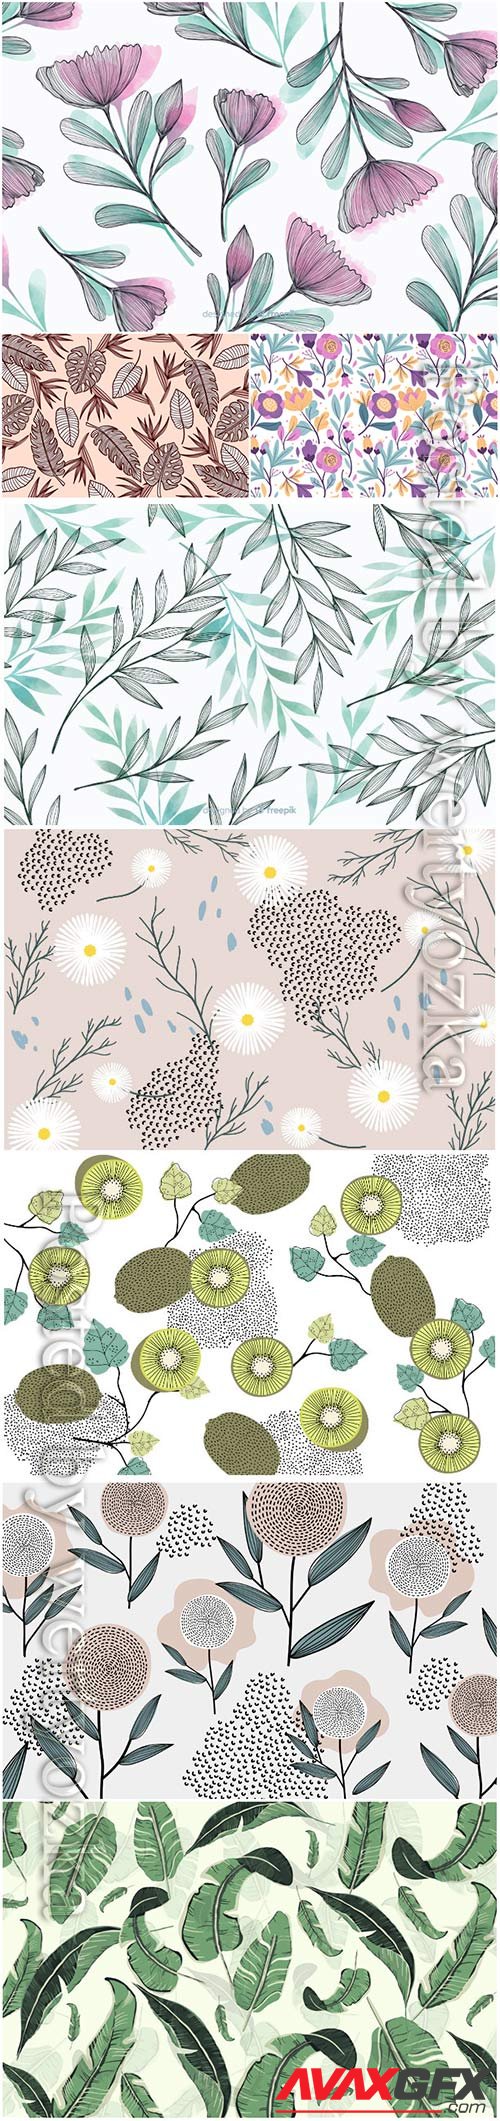 Seamless floral vector backgrounds